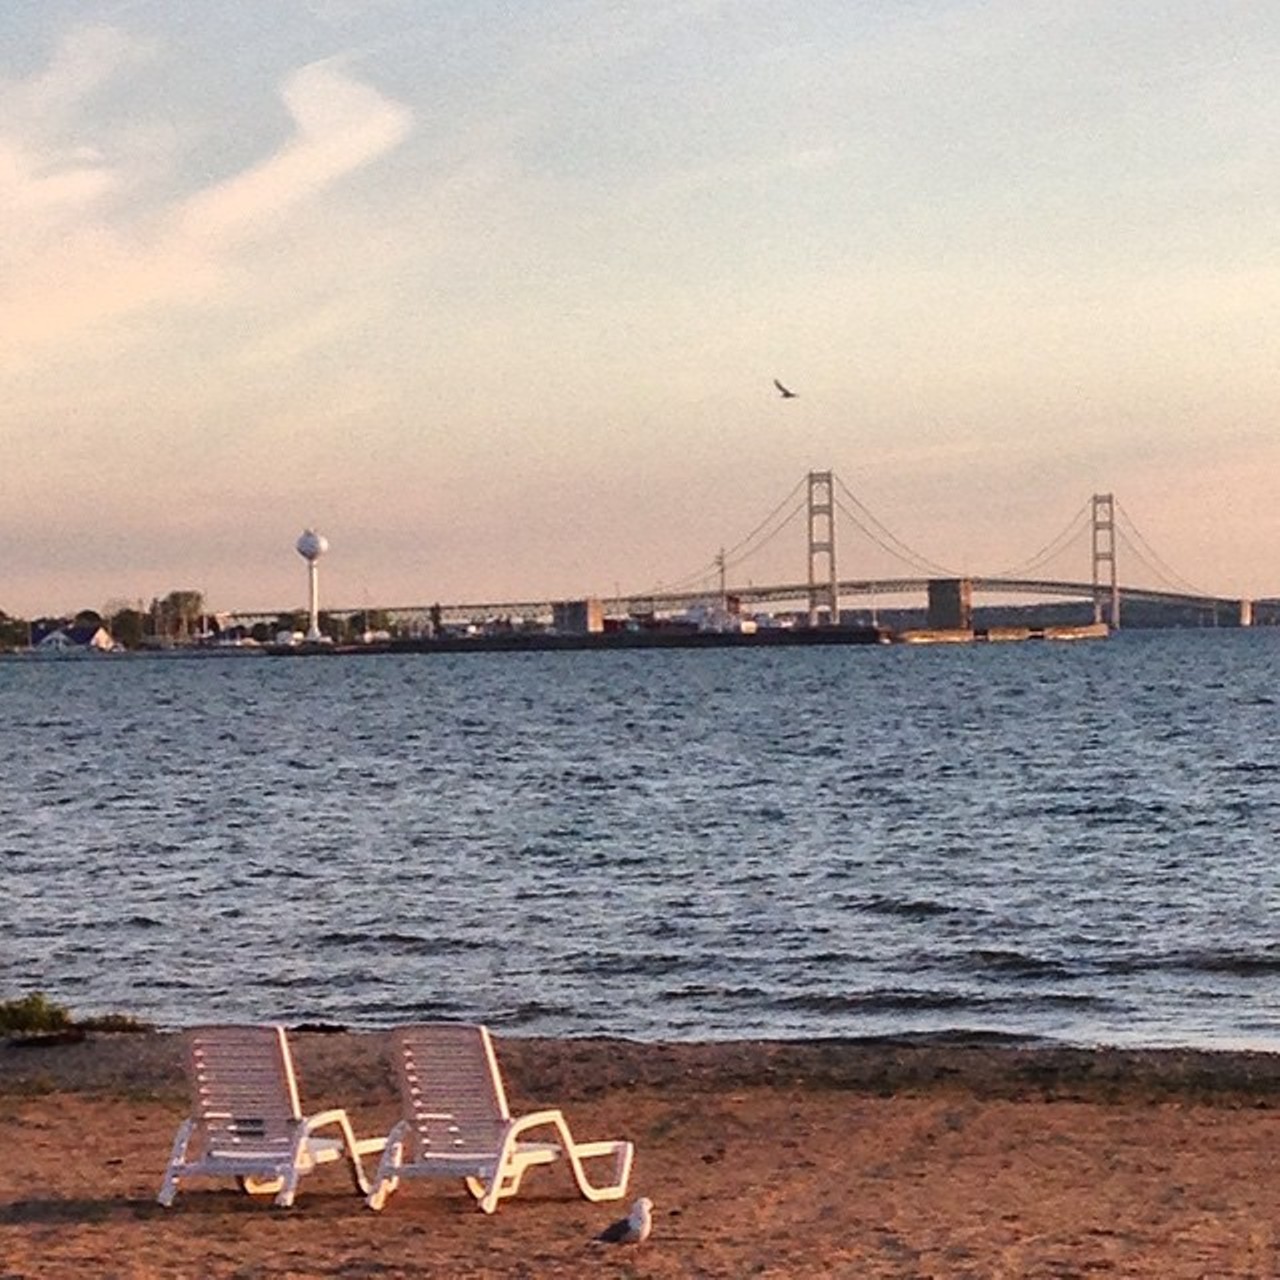 Tee Pee Campground11262 W. US 23
Mackinaw City, MI 49701 | 231-436-5391A family owned private campground overlooking the Straits of Mackinac with spectacular views of the Mighty Mackinac Bridge, Mackinac Island, and Great Lakes Freighter traffic. (Photo via Instagram user @abbylforstner)